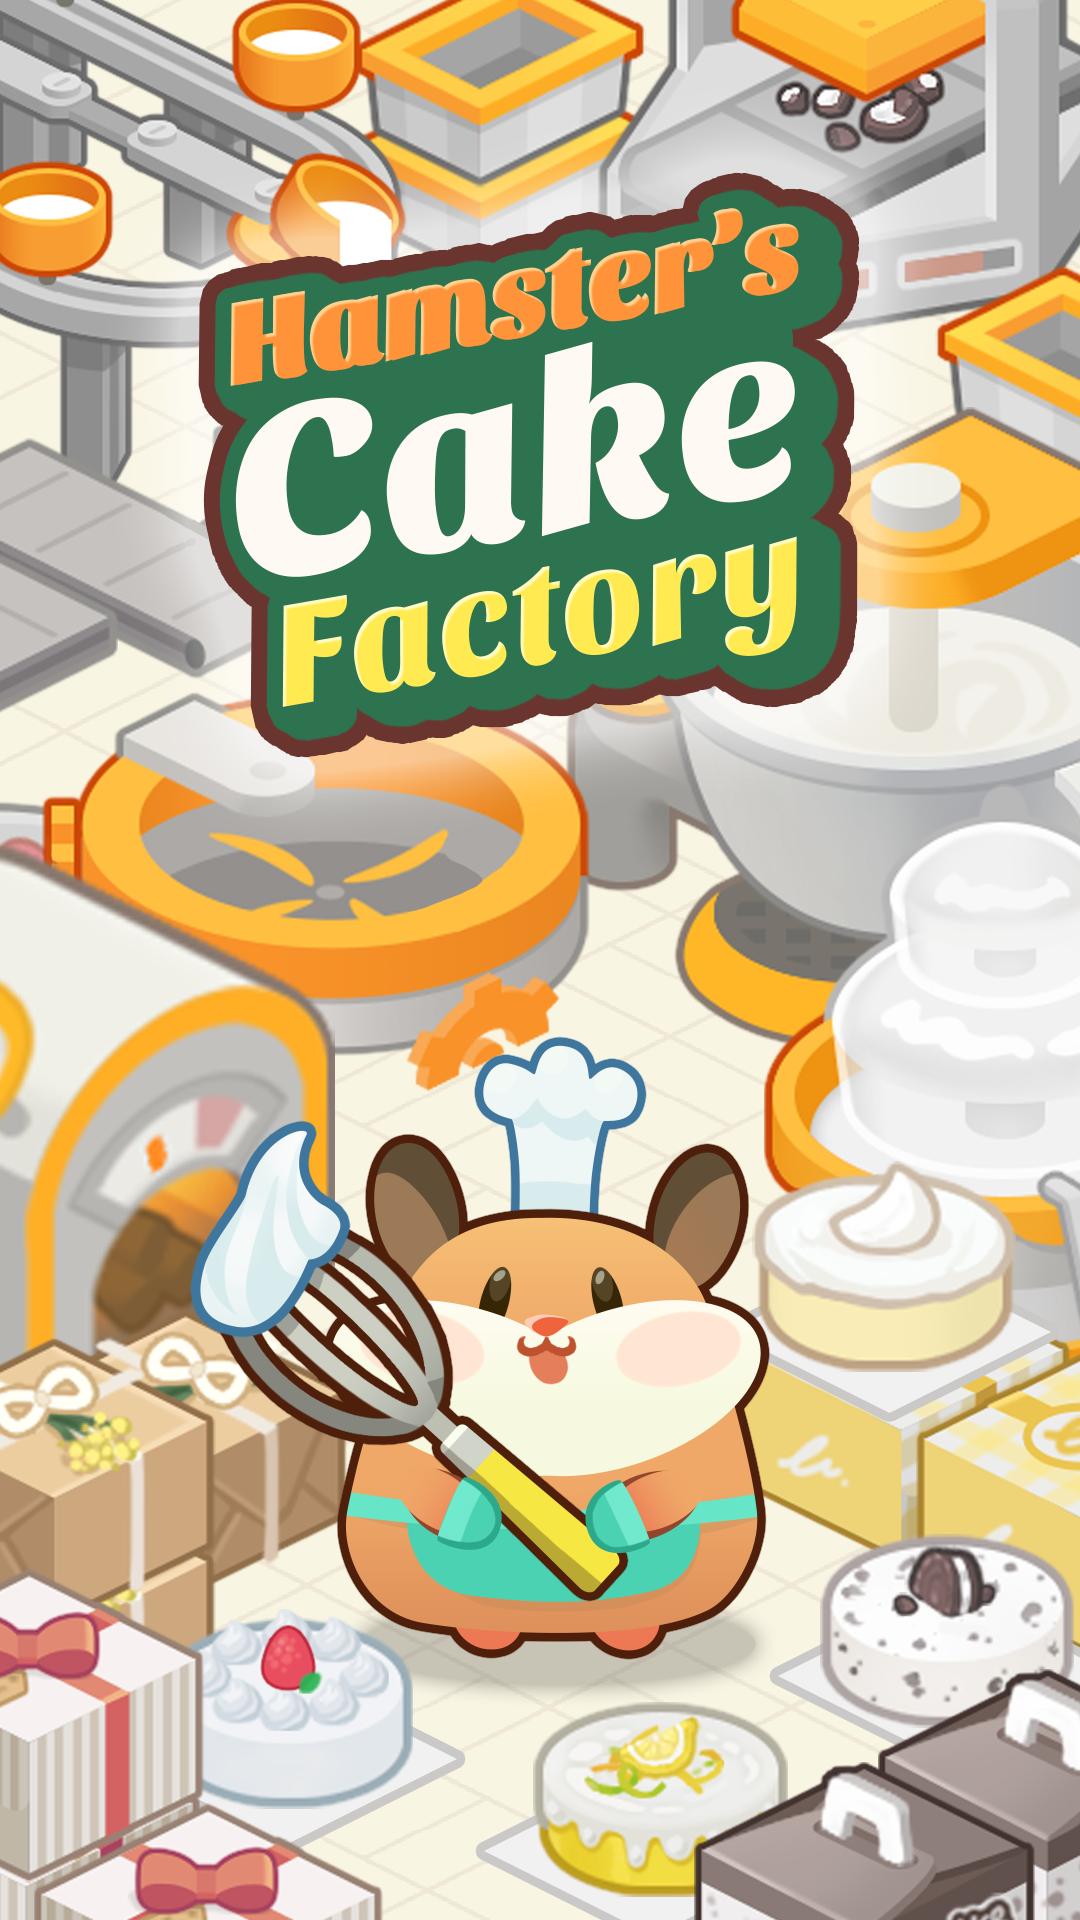 Hamster's Cake Factory - Idle Baking Manager 1.0.2 Screenshot 24